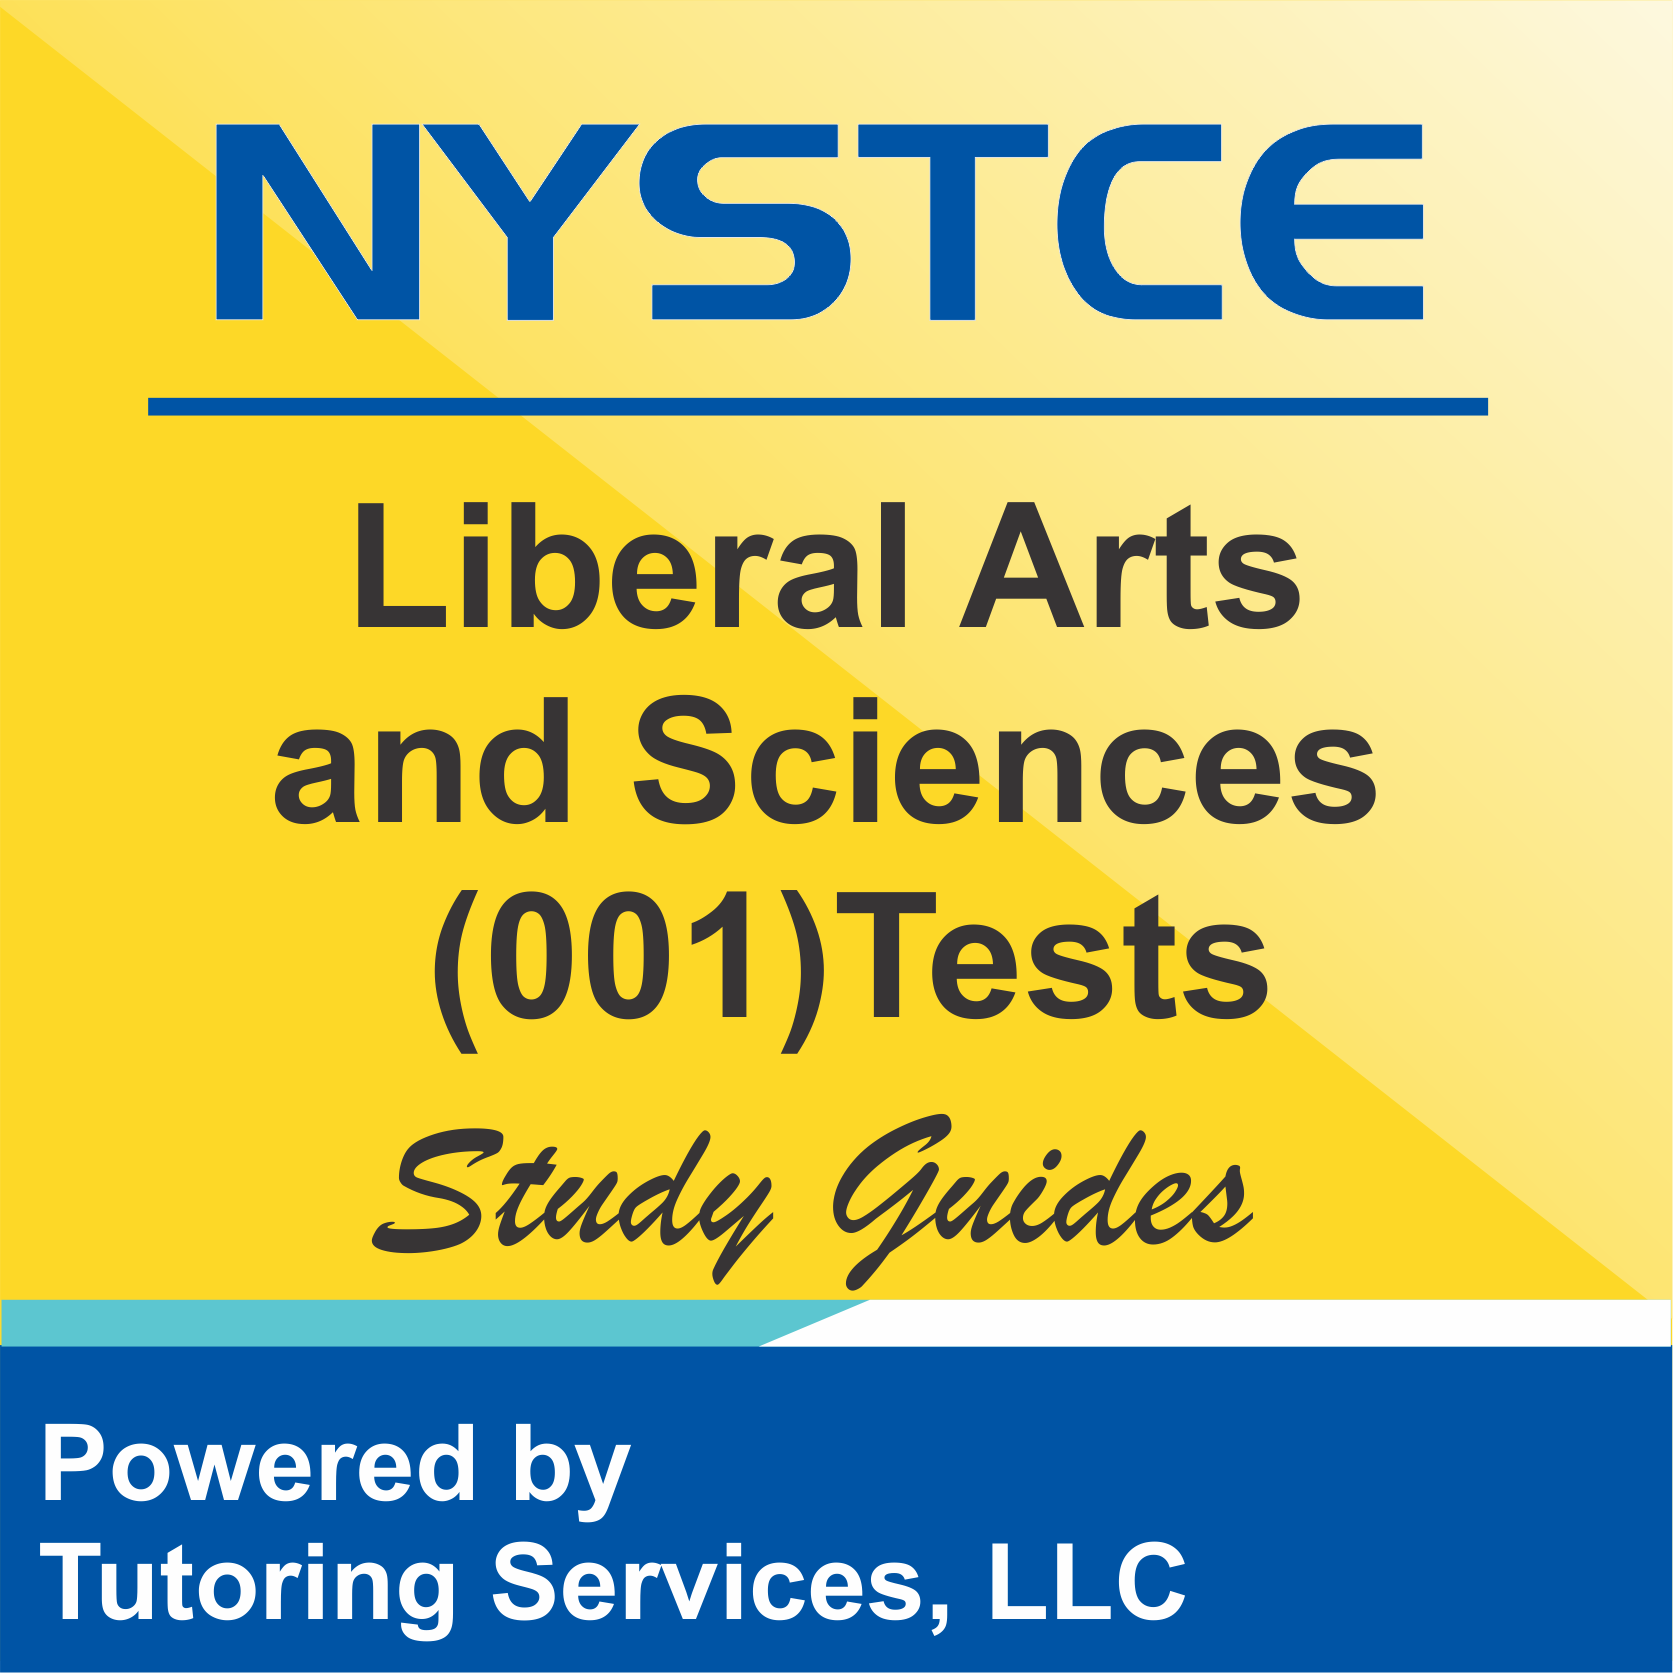 NYSTCE Licensure Test Details for Liberal Arts and Sciences 001